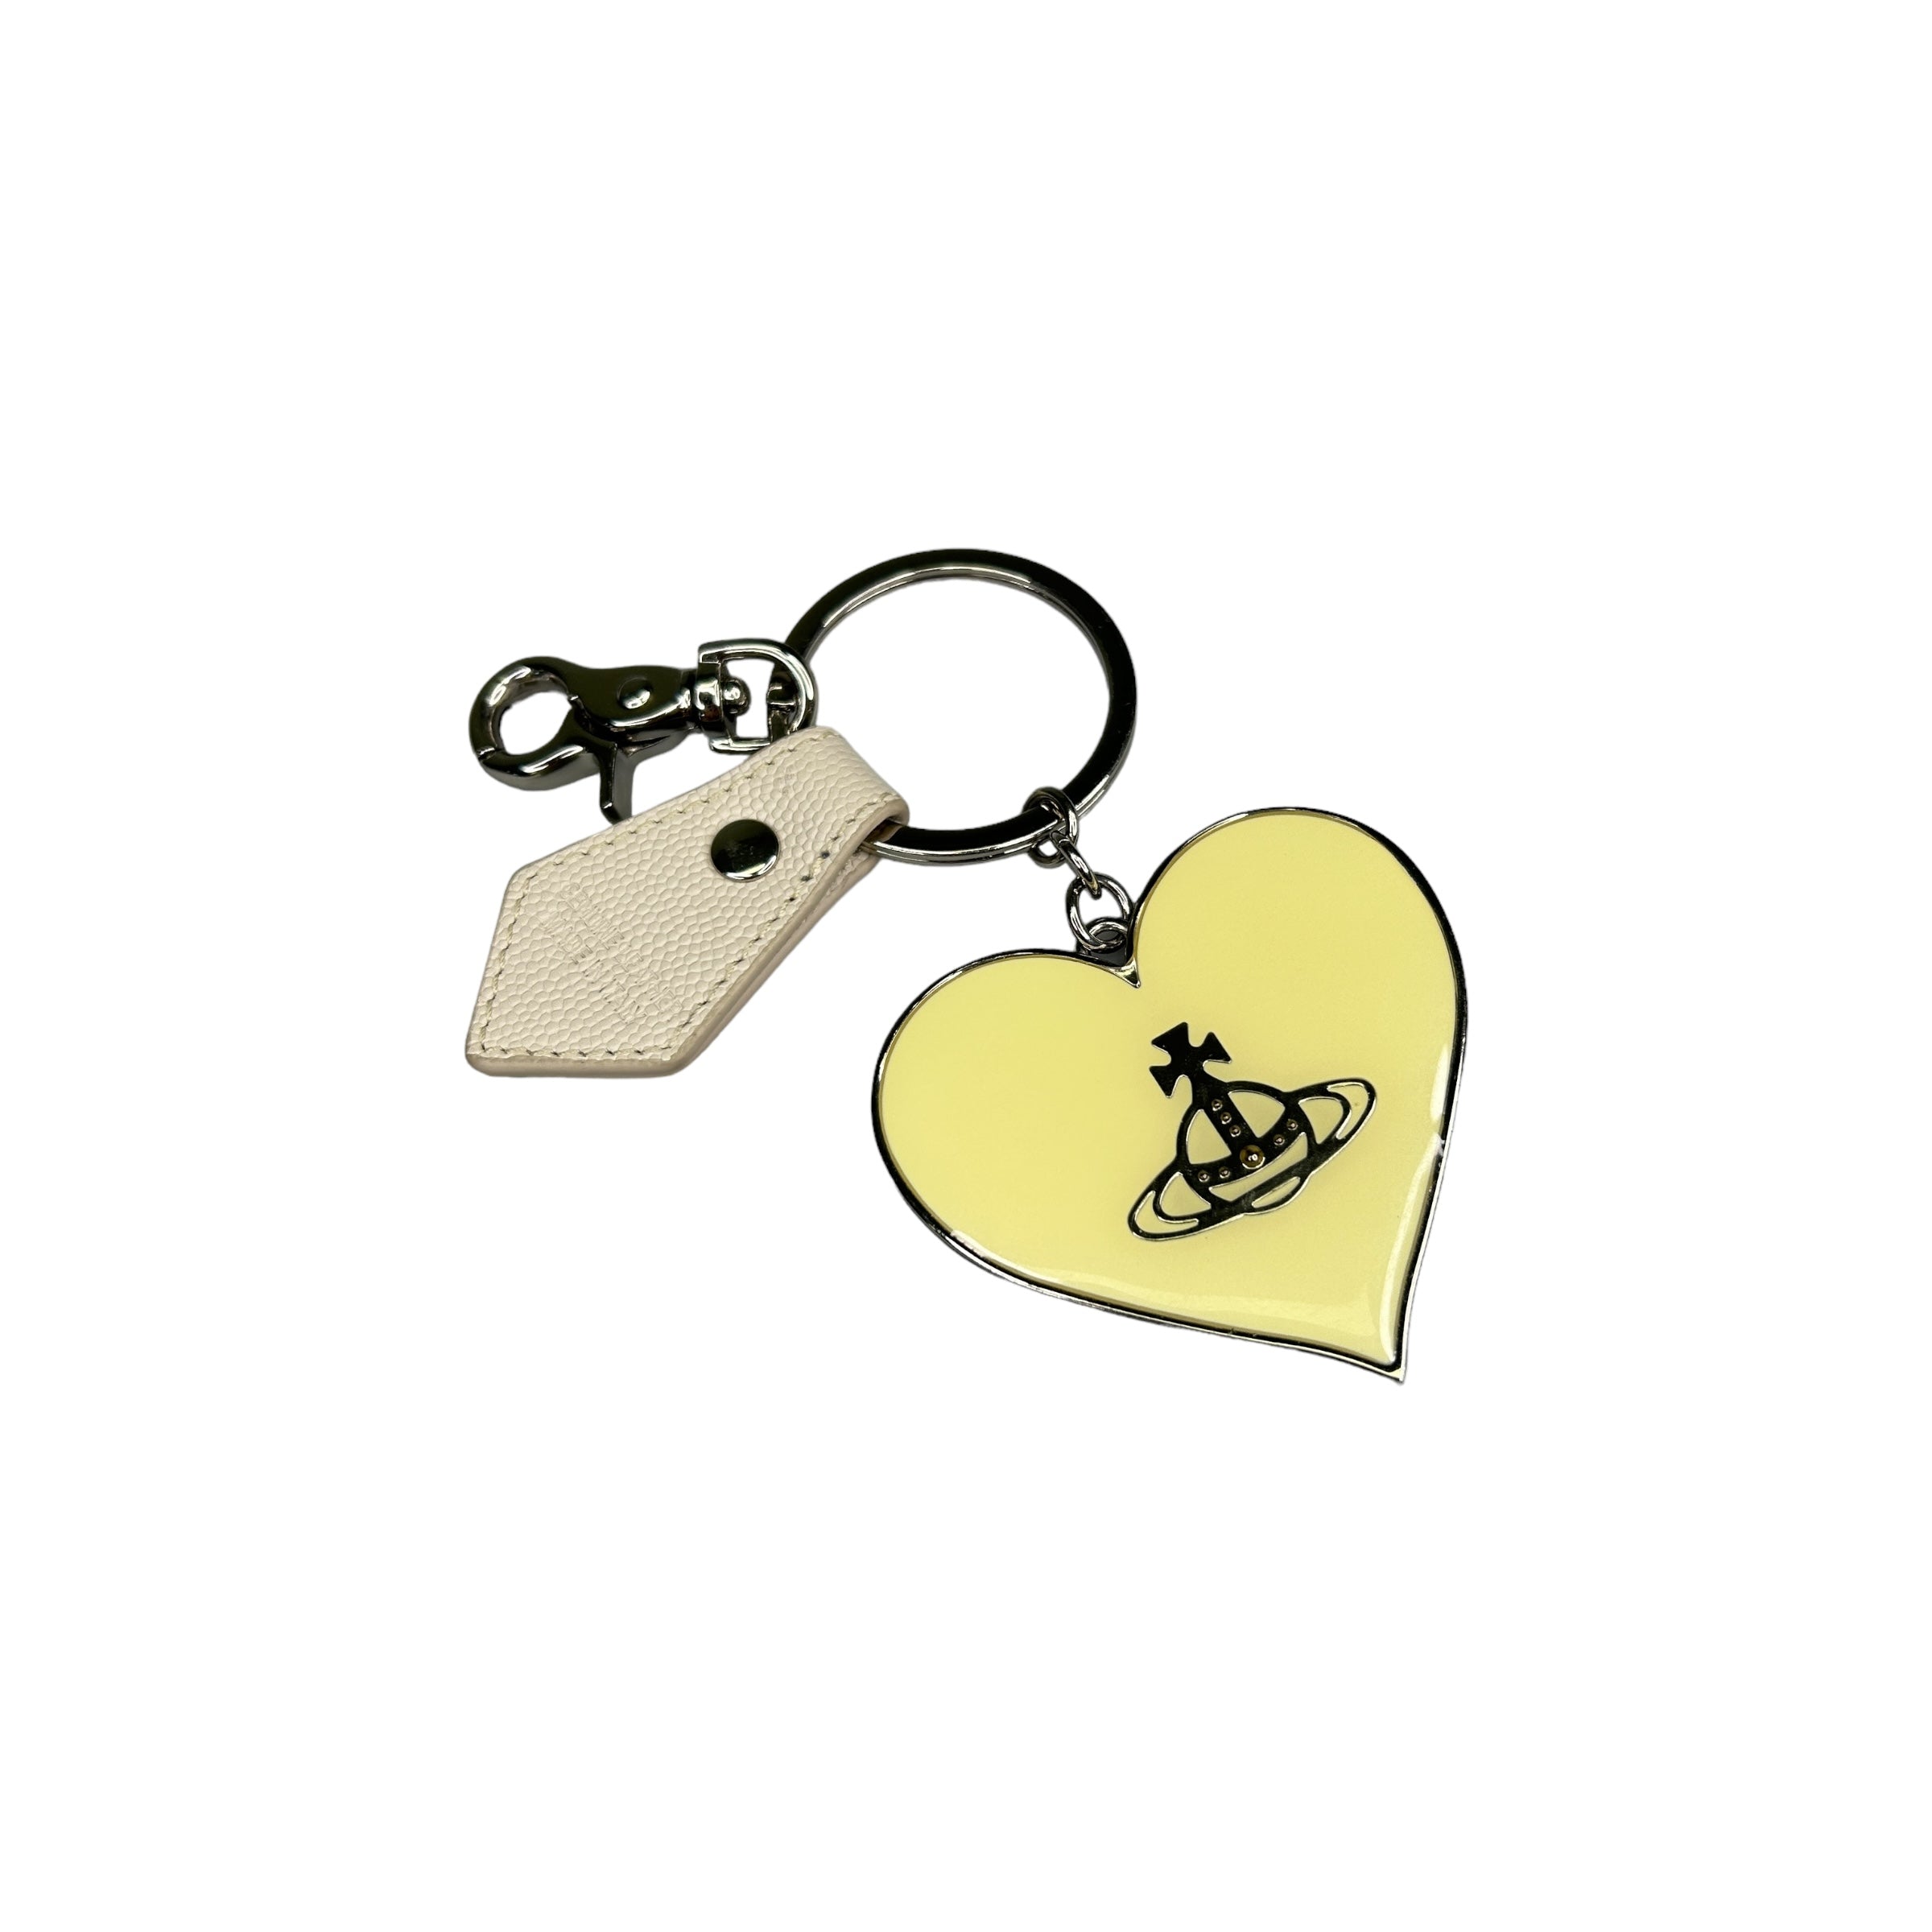 VIVIENNE WESTWOOD ORB IN HEART YELLOW KEYCHAIN W/LEATHER STRAP AND CLASP